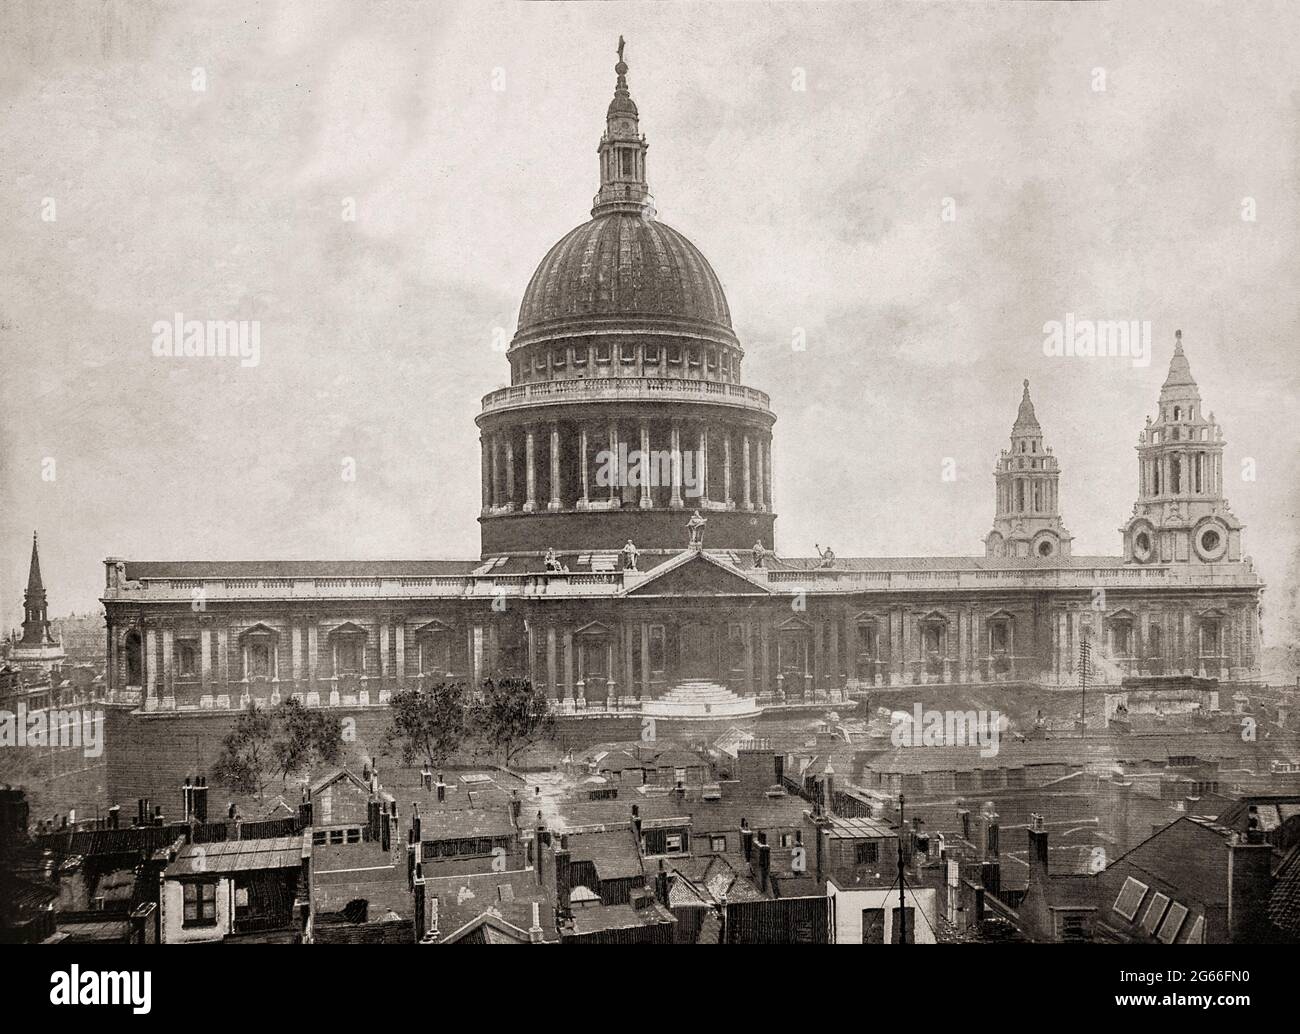 A late 19th century view of the dome of St Paul's Cathedral, dating from the late 17th century, designed in the English Baroque style by Sir Christopher Wren. Its construction, completed in Wren's lifetime, was part of a major rebuilding programme in the City after the Great Fire of London. The Anglican cathedral sits on Ludgate Hill at the highest point of the City of London, England. Stock Photo